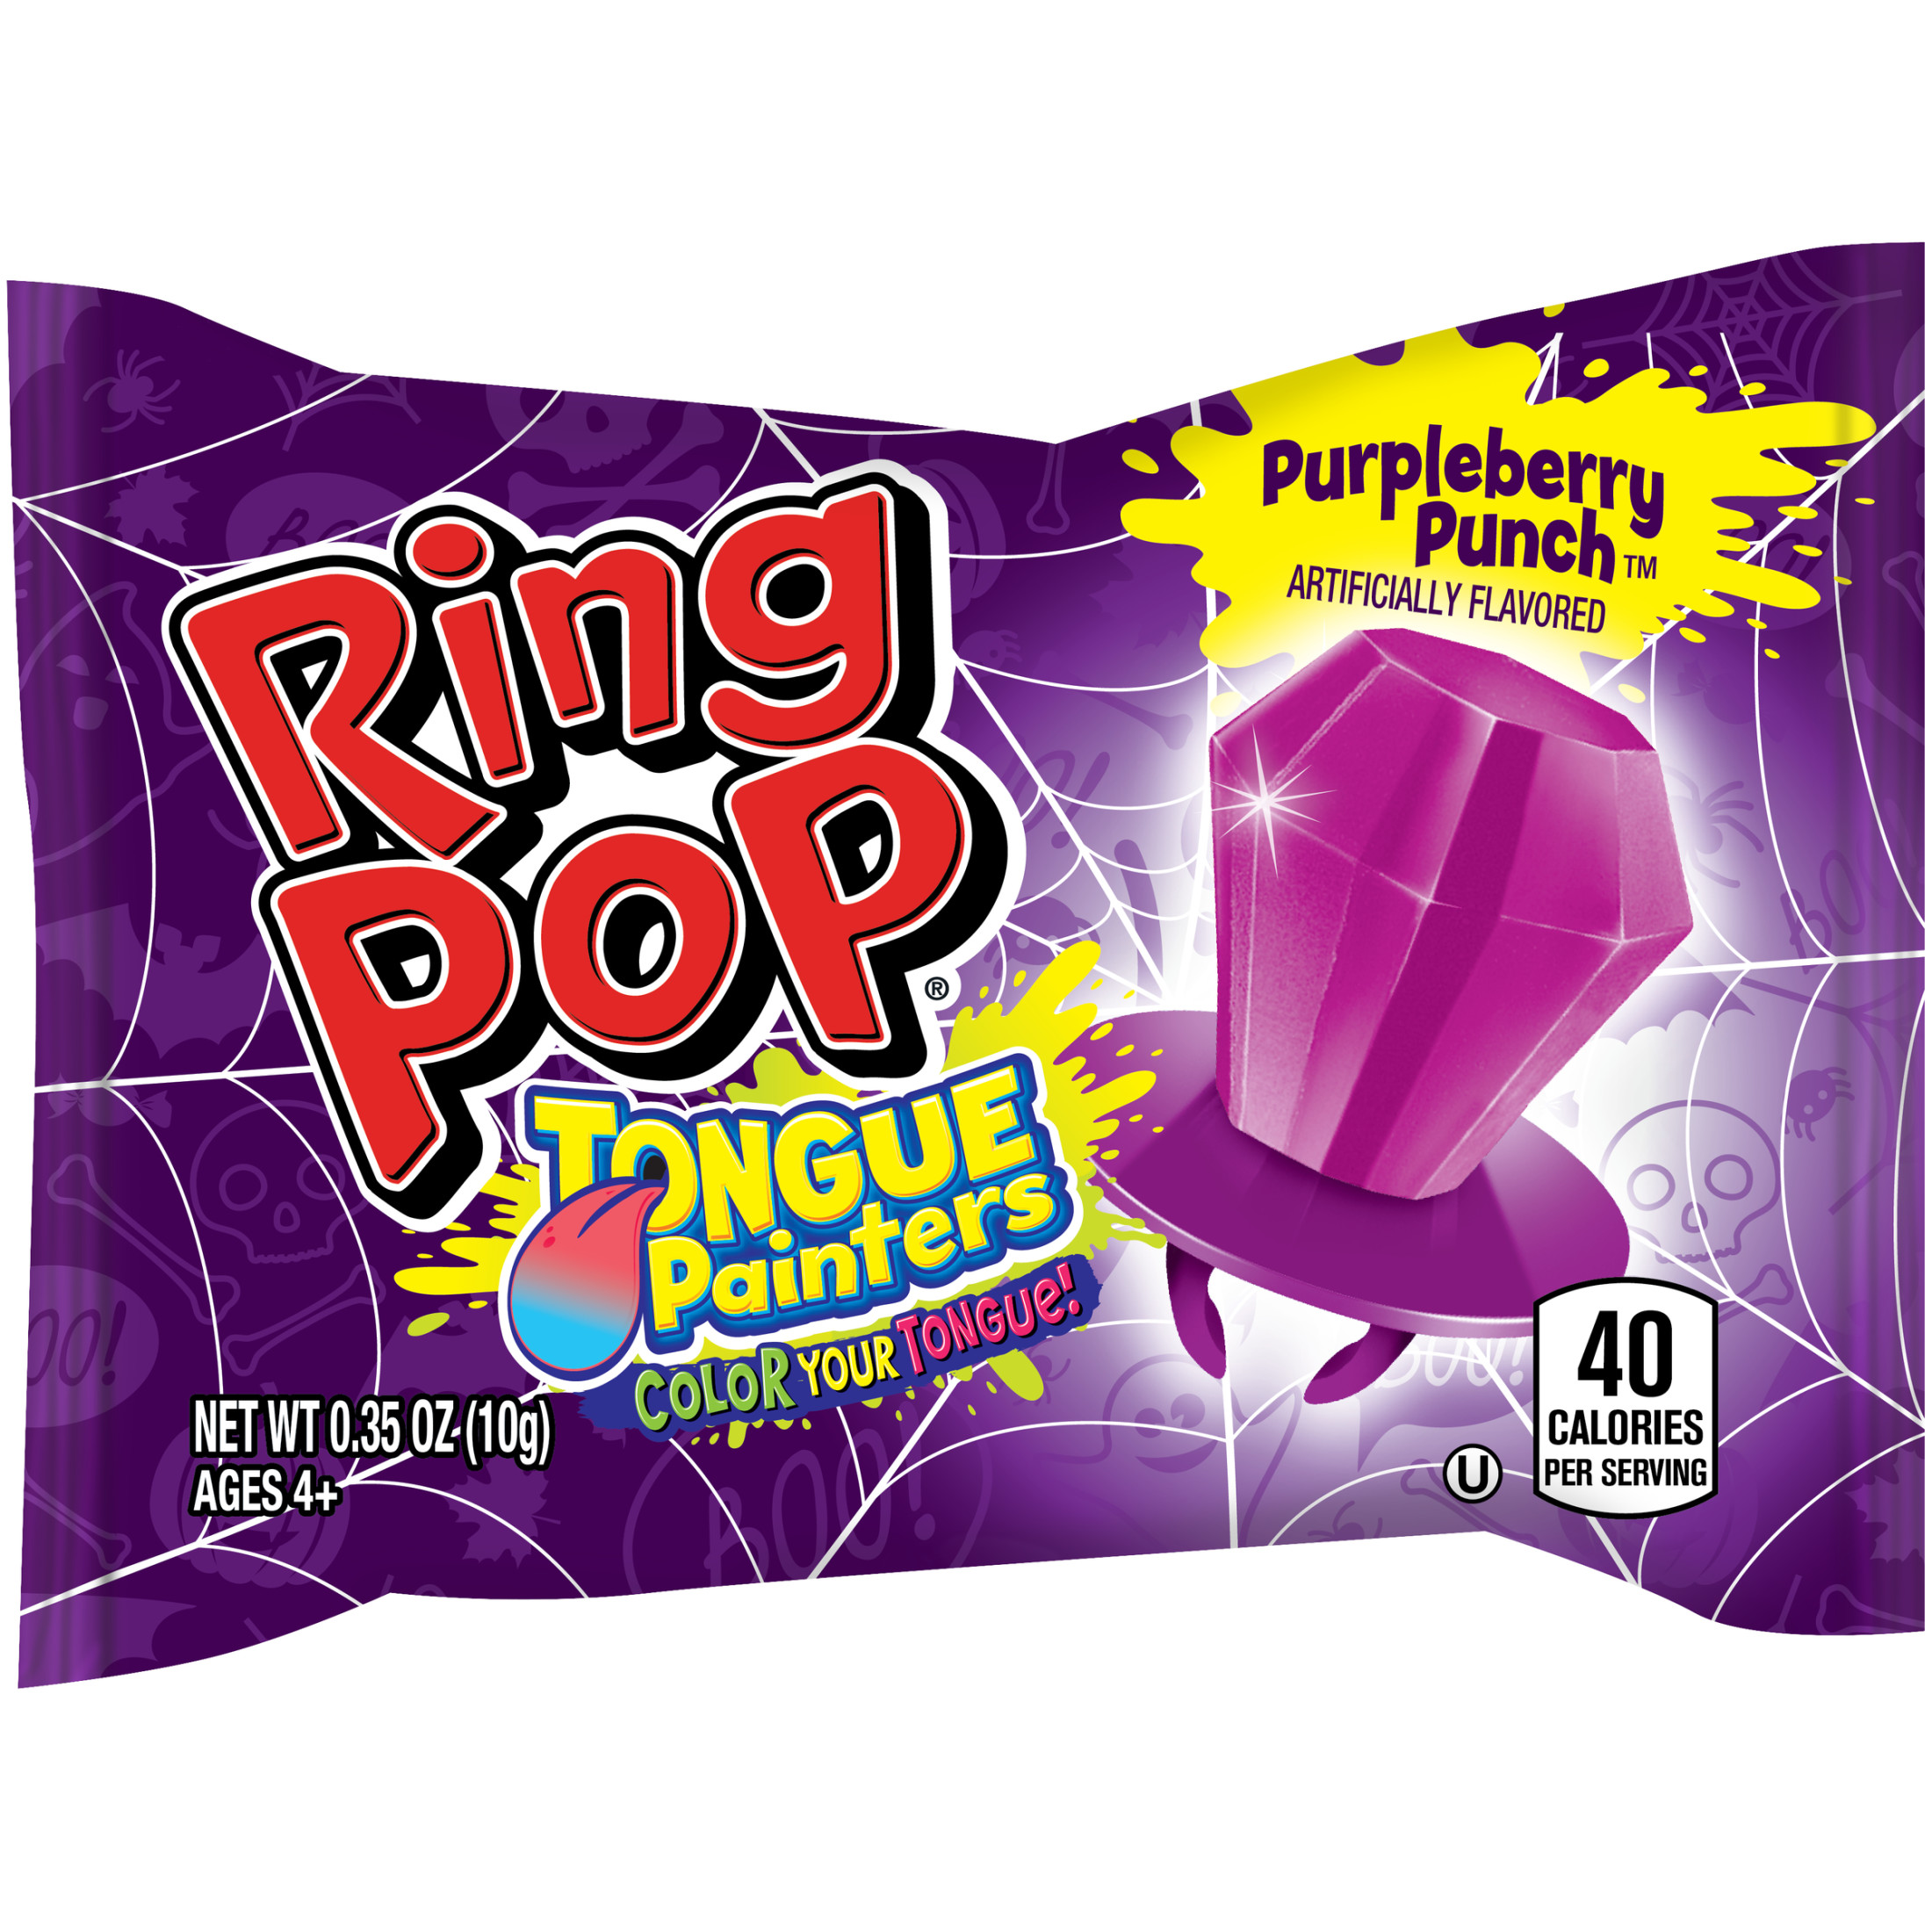 Ring Pop Halloween Variety Box, Assorted Flavor Lollipops, 8.4 oz, 24 Count Box - image 3 of 6